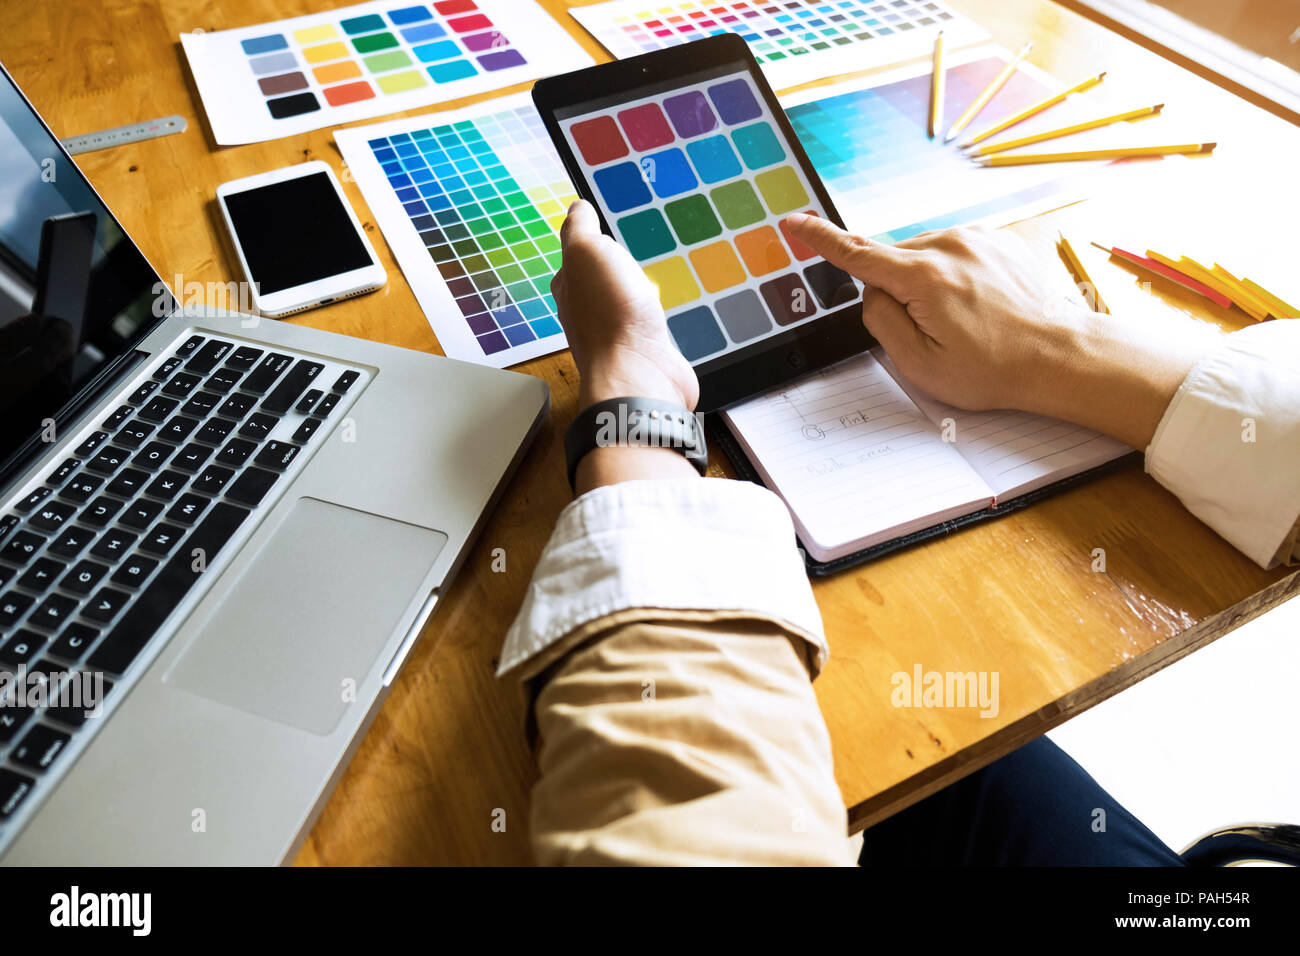 Graphic designers use the tablet to choose colors from the color bar example for design ideas, Creative designs of graphic designers concept. Stock Photo